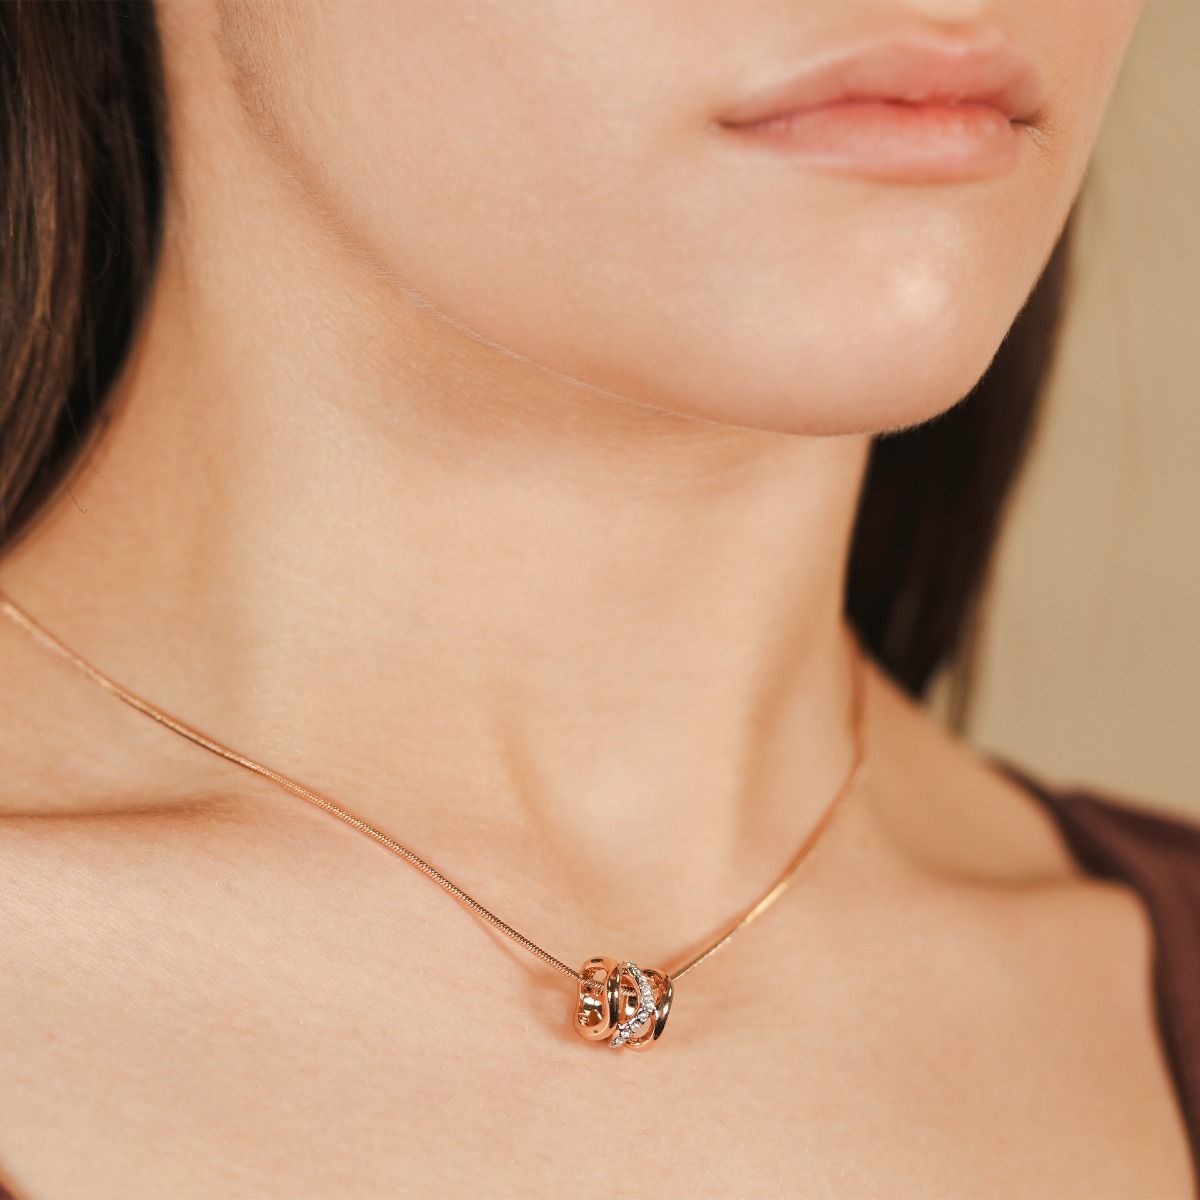 Depicting flowing energy and movement, the Bayswater pendant is modern and luxurious. Soft swirls of rose gold and rhodium-plated bands come together with subtle white crystal details and a delicate snake chain to create a stunning and intricate design.